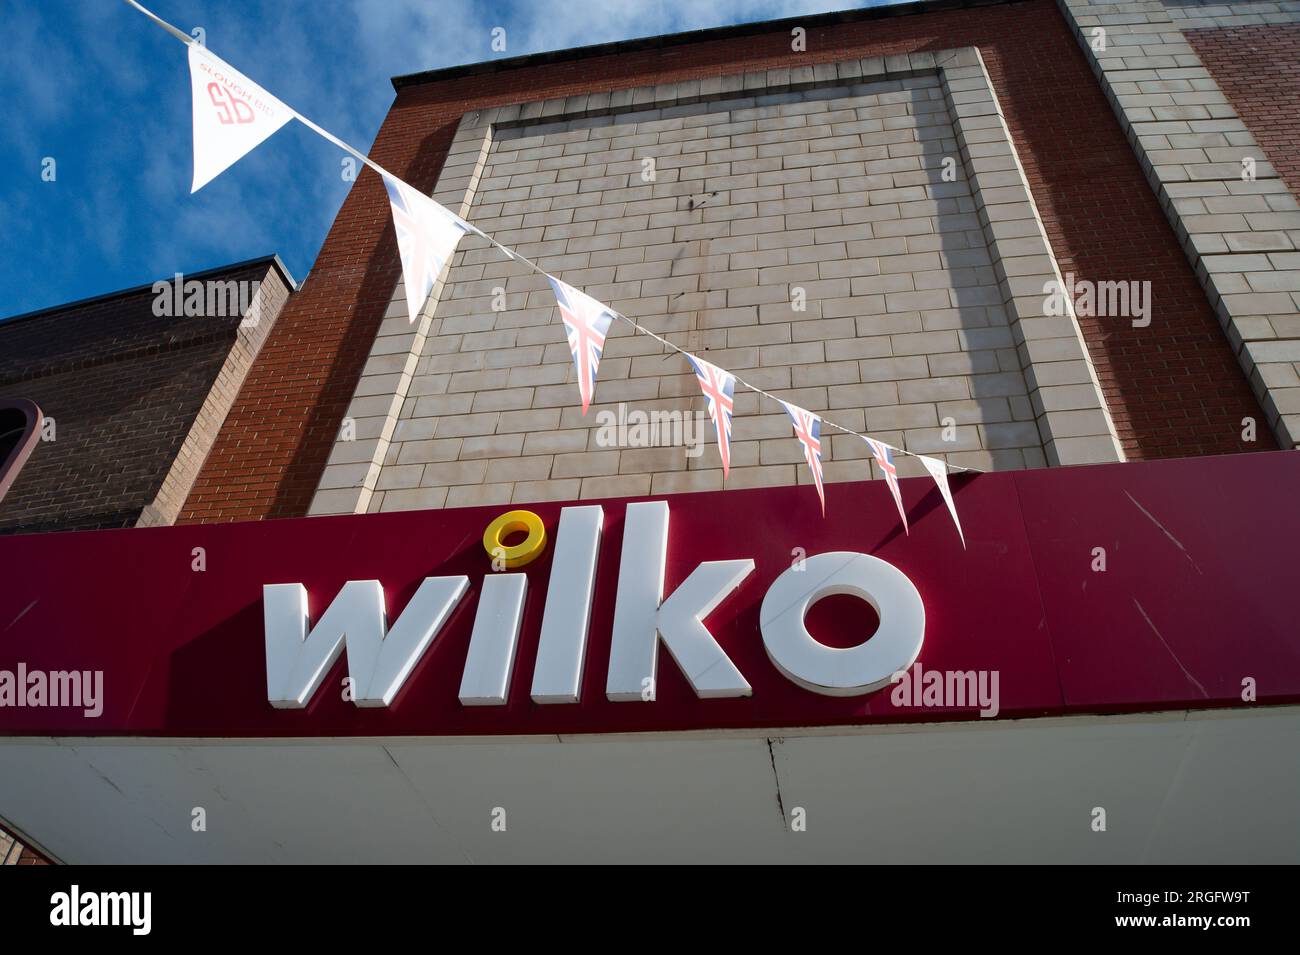 Slough, Berkshire, UK. 9th August, 2023. A Wilko store in Slough High Street, Berkshire. Private equity firm, Gordon Brothers, are said to be considering a potential rescue bid for the high street store Wilko. Sky News have reportedly been told that 'Gordon Brothers had expressed interest in partnering with other financial backers to inject £20m of equity and provide £50m in debt financing'. Wilko have filed a notice of intention to appoint administrators at the High Court putting 12,000 jobs at risk across the 400 Wilko stores in the UK. Some Wilko stores are having massive cut price sales bu Stock Photo